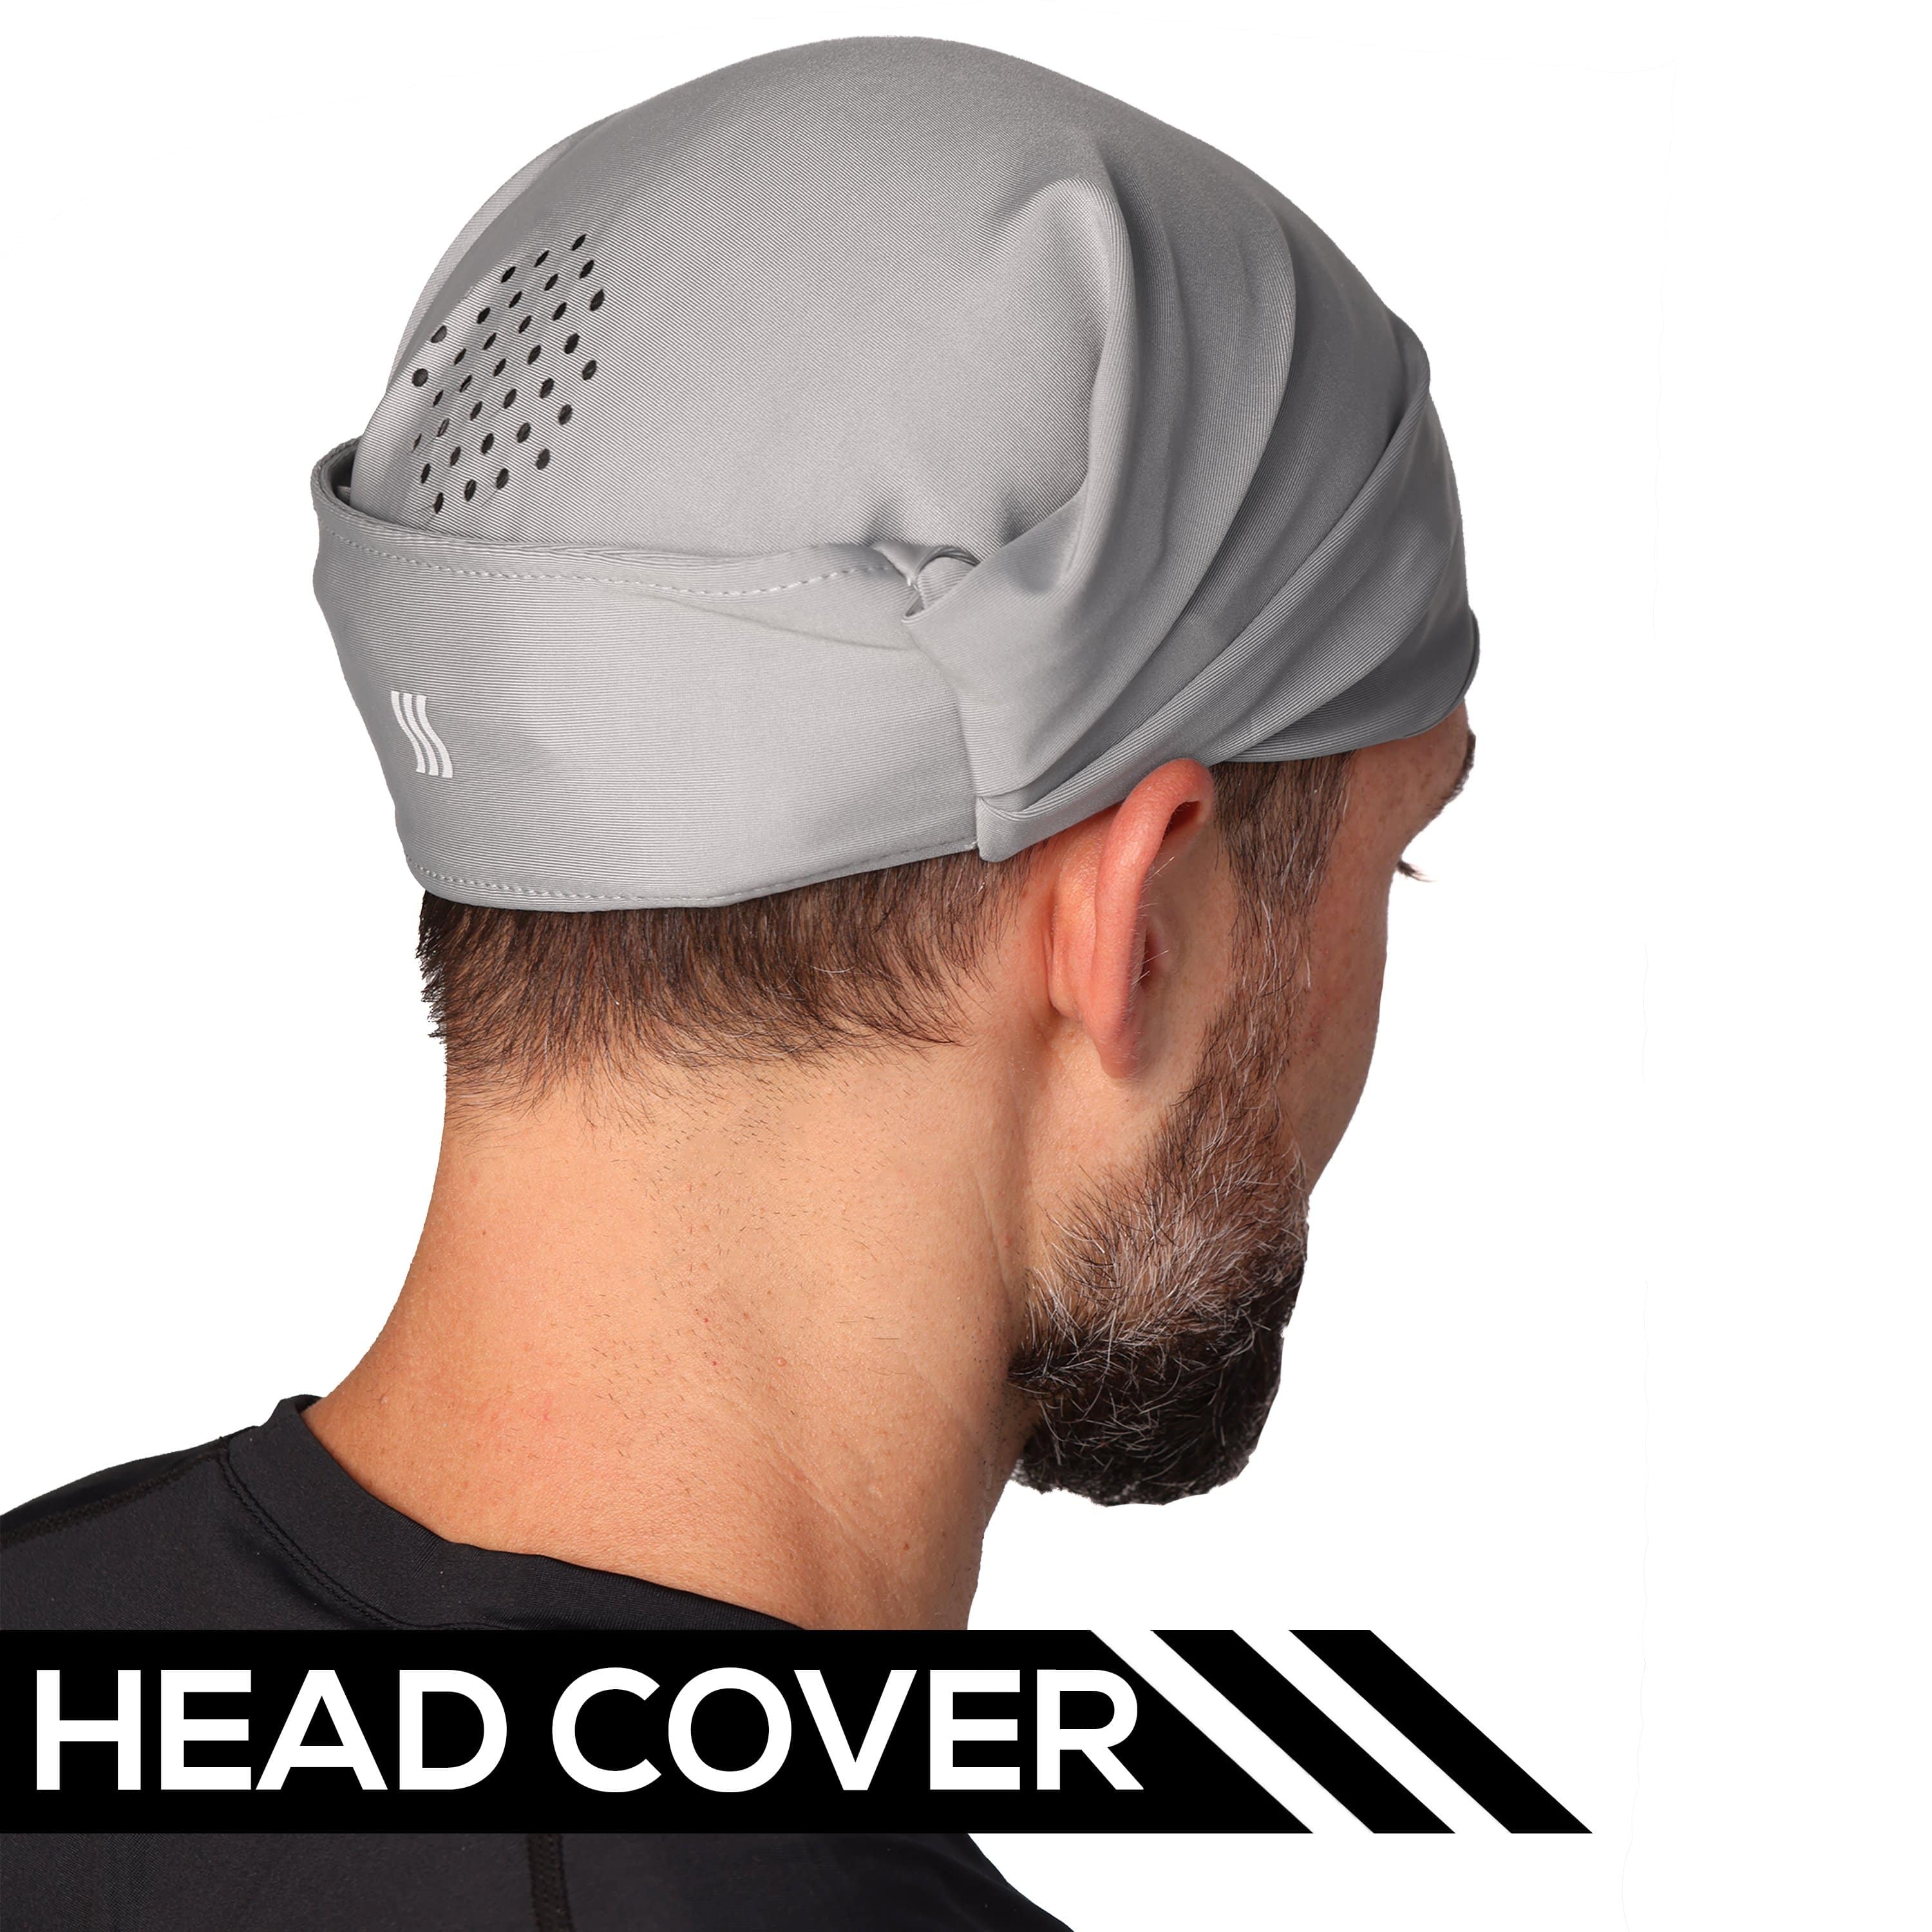 Mens workout headband that acts as a vented head cover if desired.